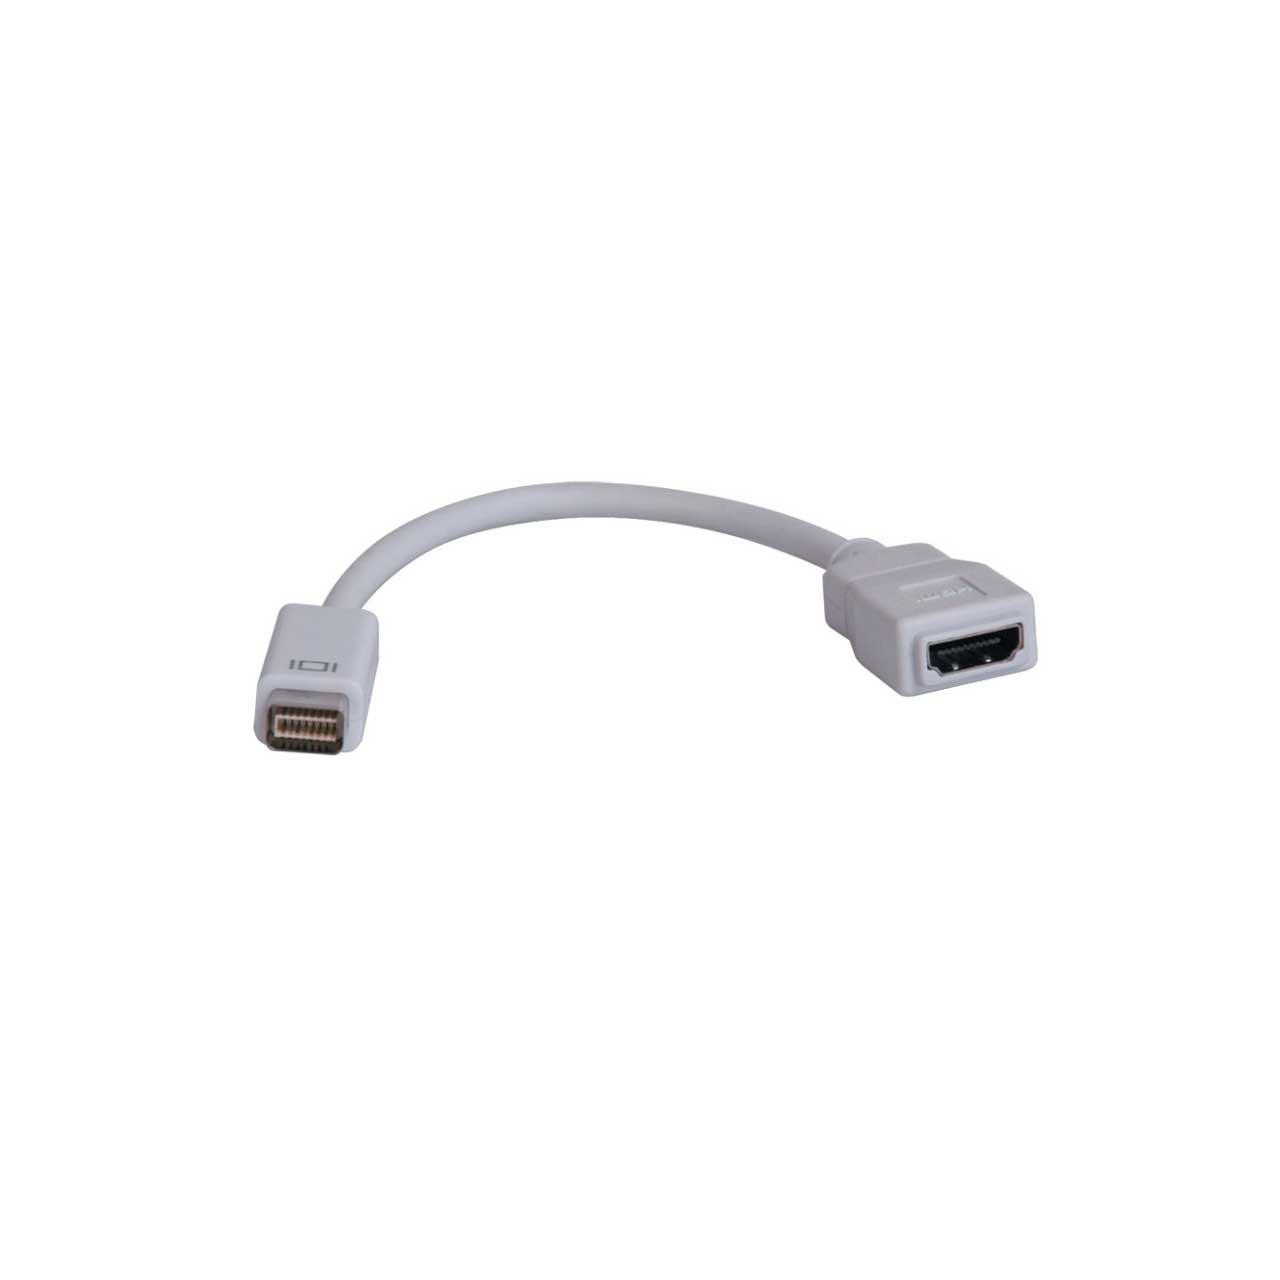 Misbrug Tag det op Minde om Tripp Lite P138-000-HDMI Mini DVI to HDMI Cable Adapter Video Converter for  Macbooks and iMacs 1920x1200 (M/F)